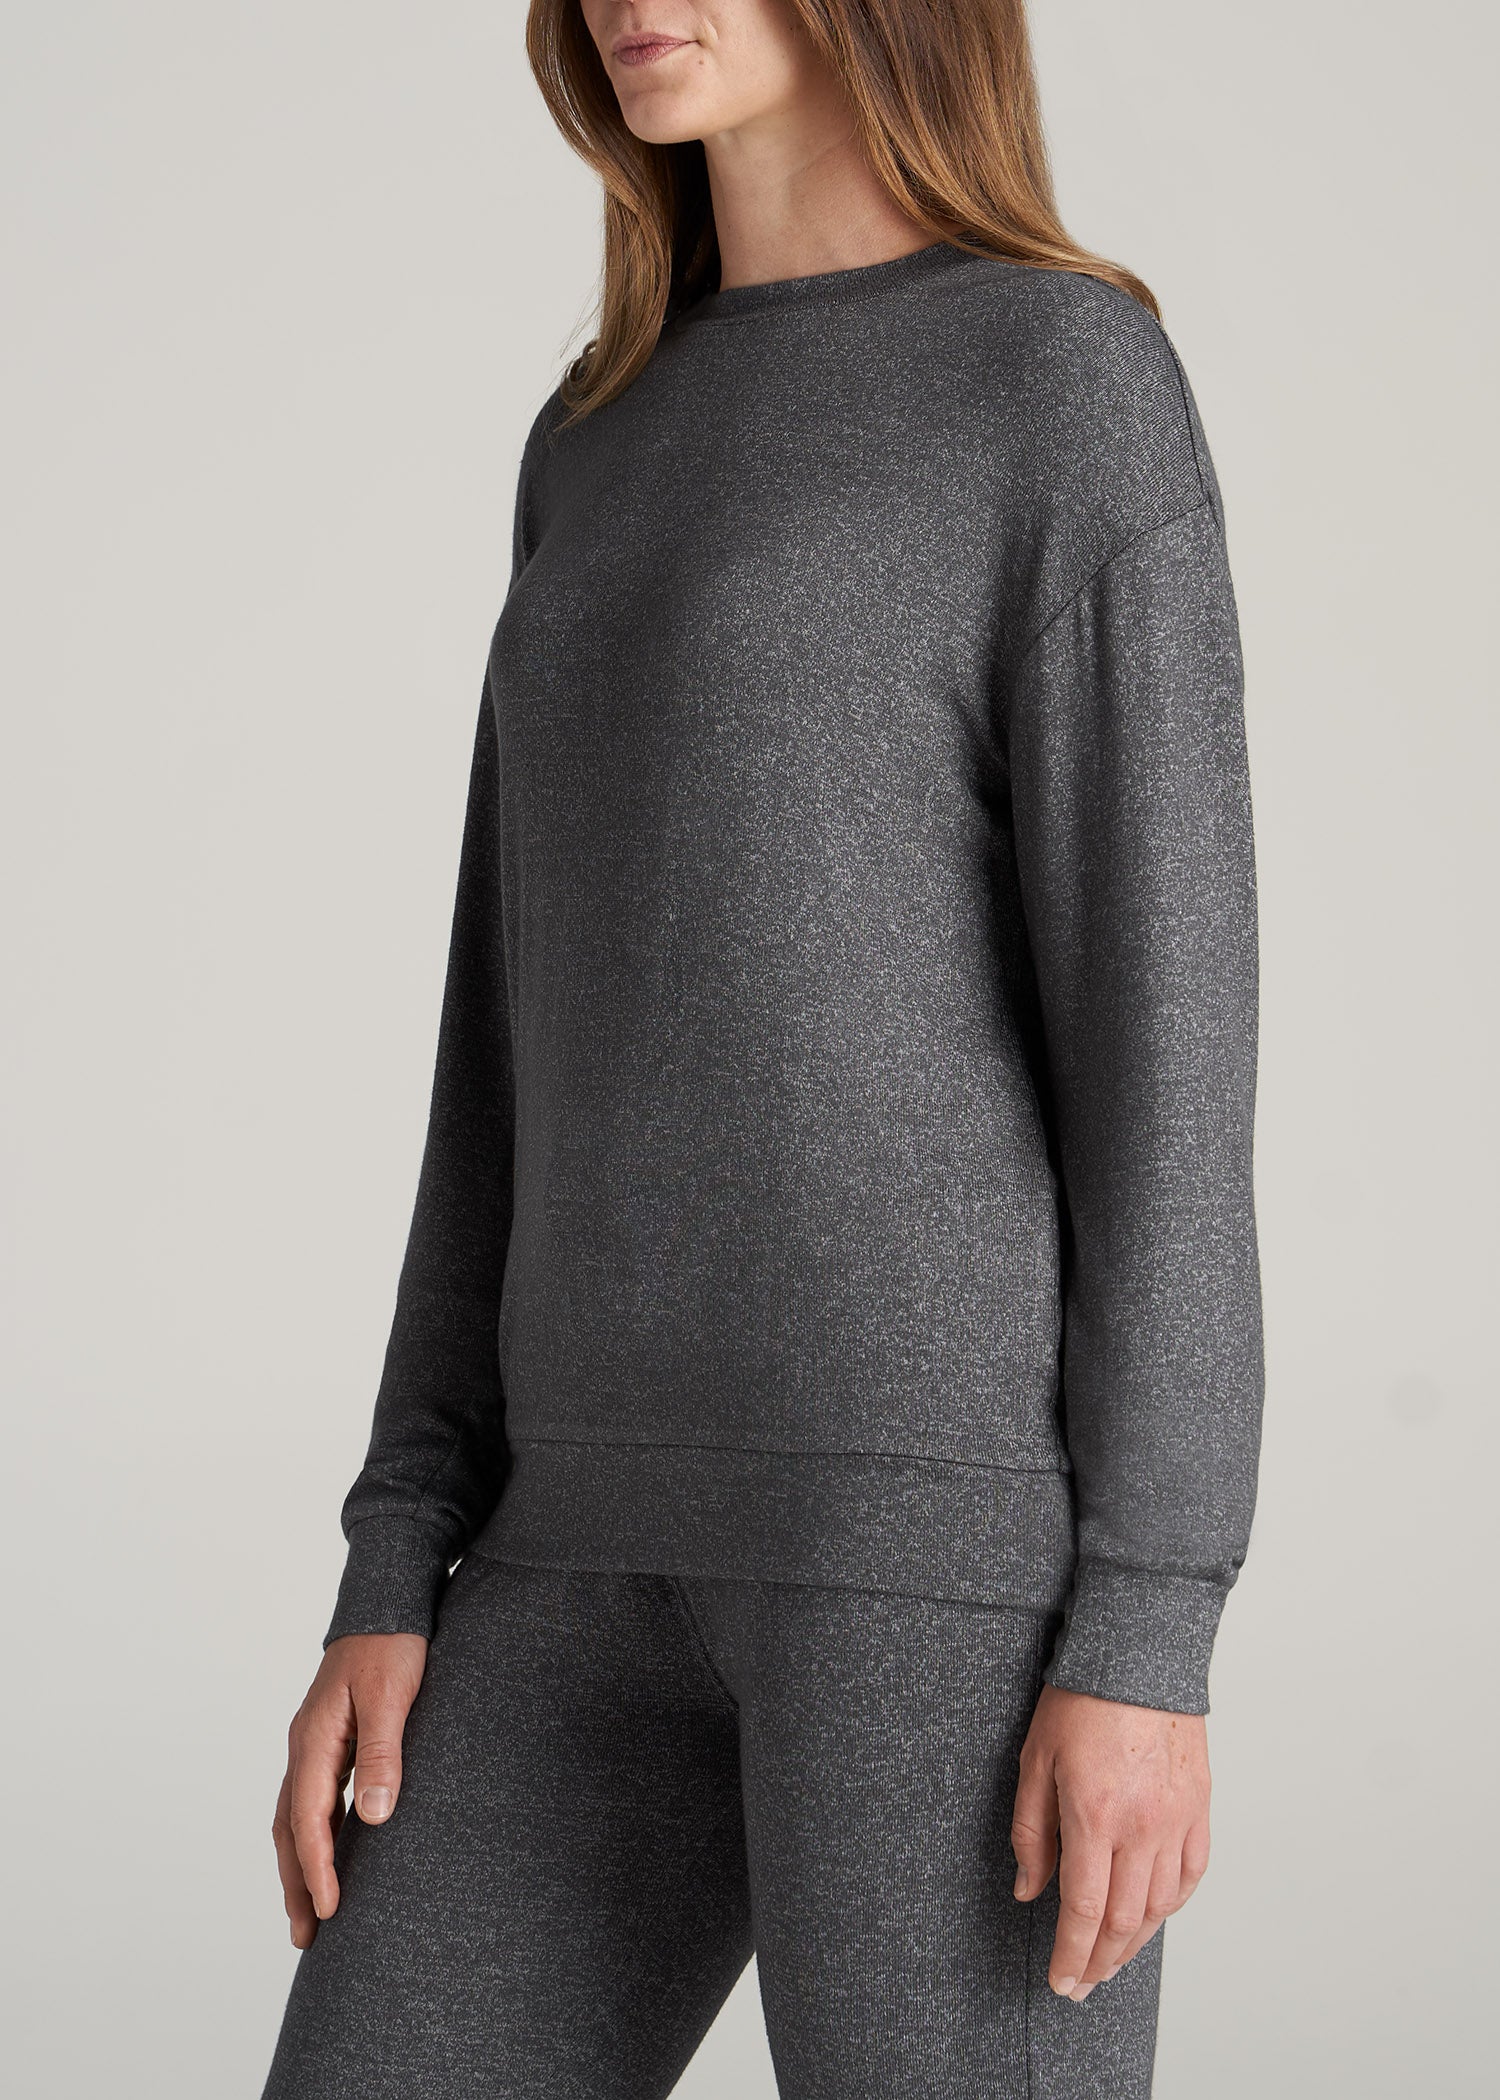 Women's Tall Cozy Lounge Crewneck With Ribbing Charcoal Mix – American Tall